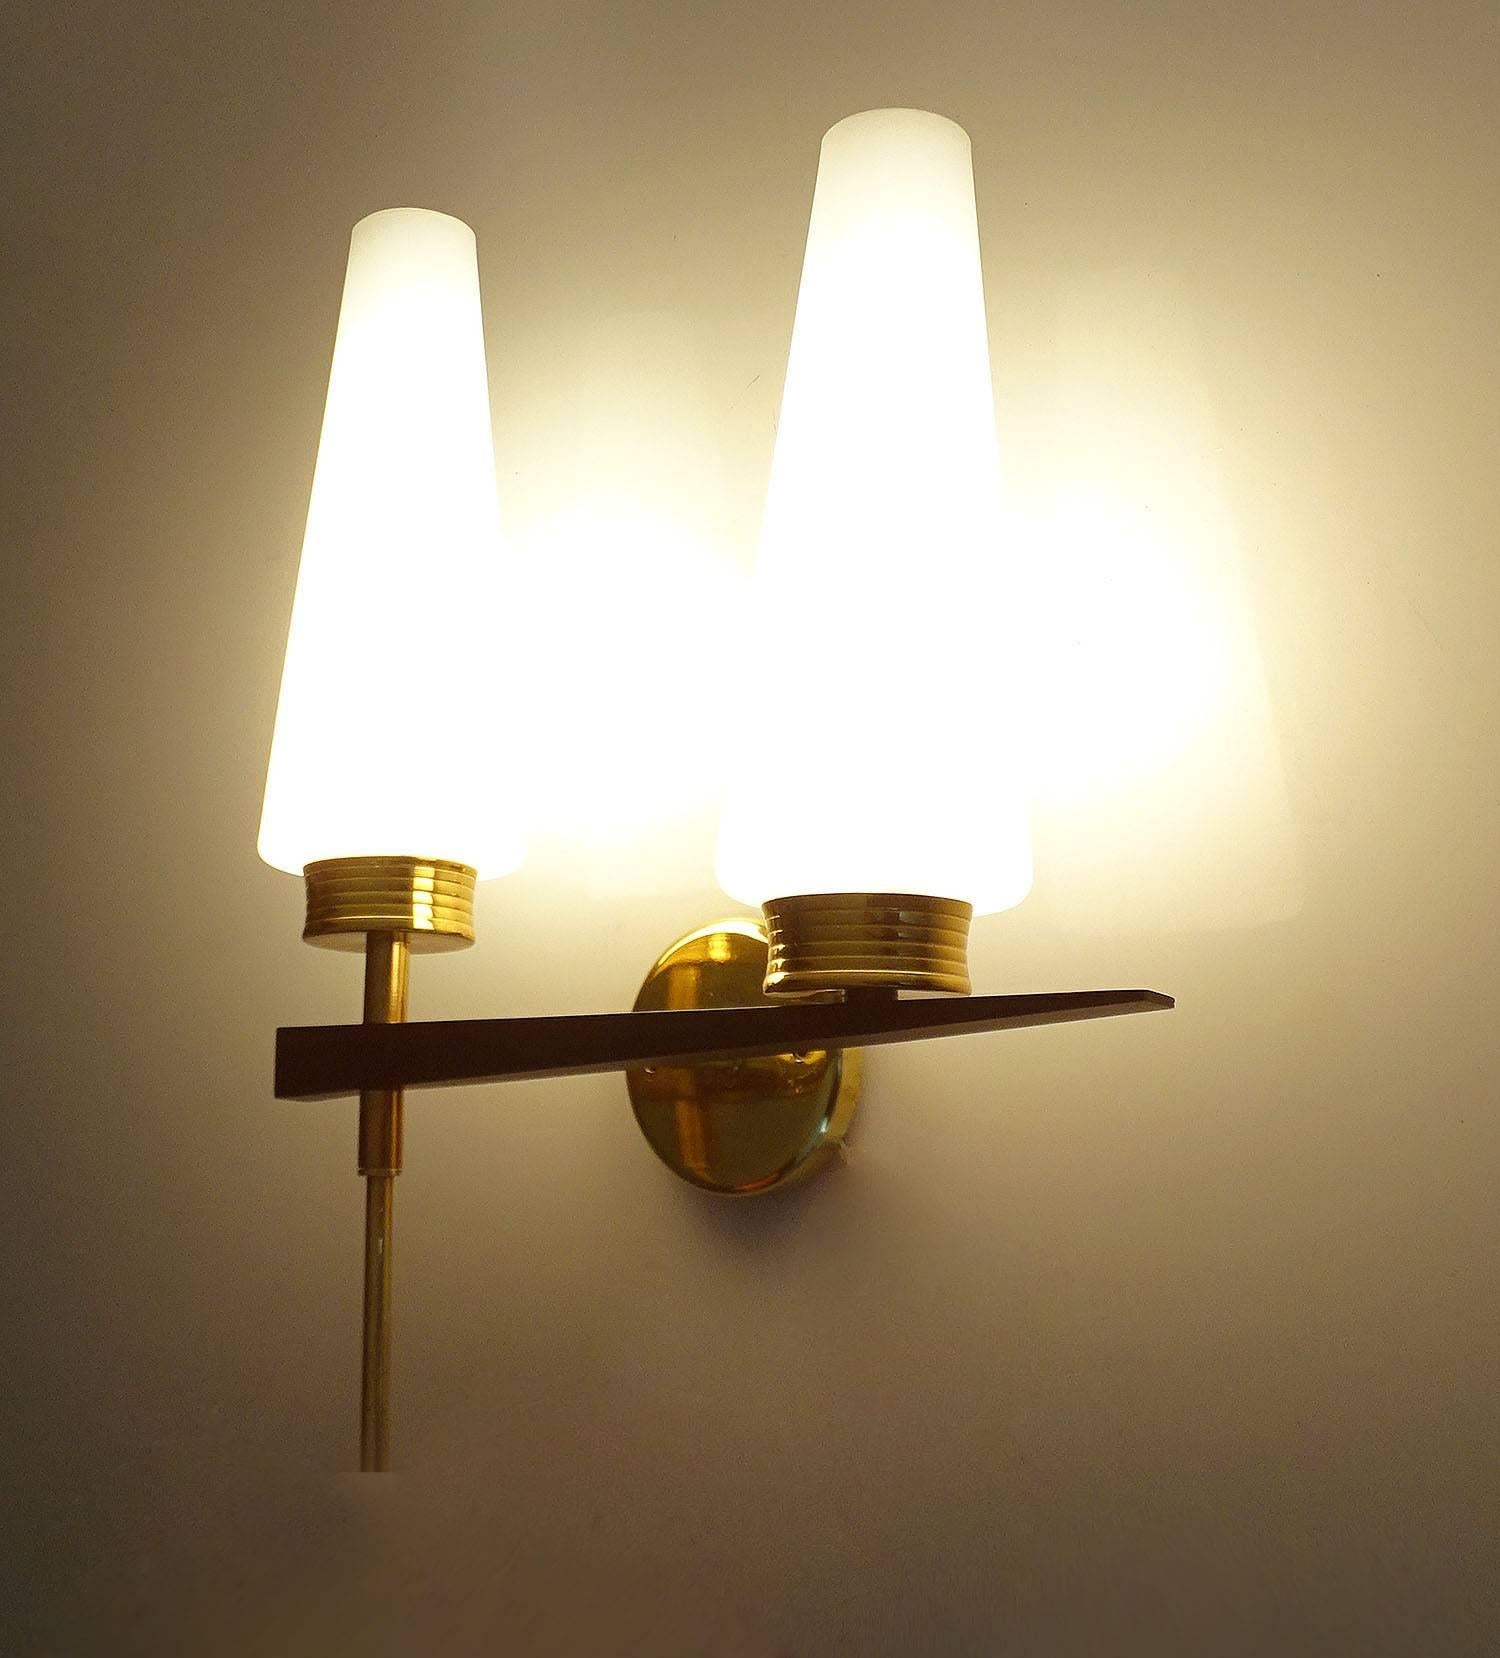 Exceptional pair of  French, architectonic modernist sconces by Maison Arlus, 1960s featuring two conical opaline glass shades mounted on an asymetrical brass and black enameled structure. EWhen lit the sconces exude a warm glow to create a nice